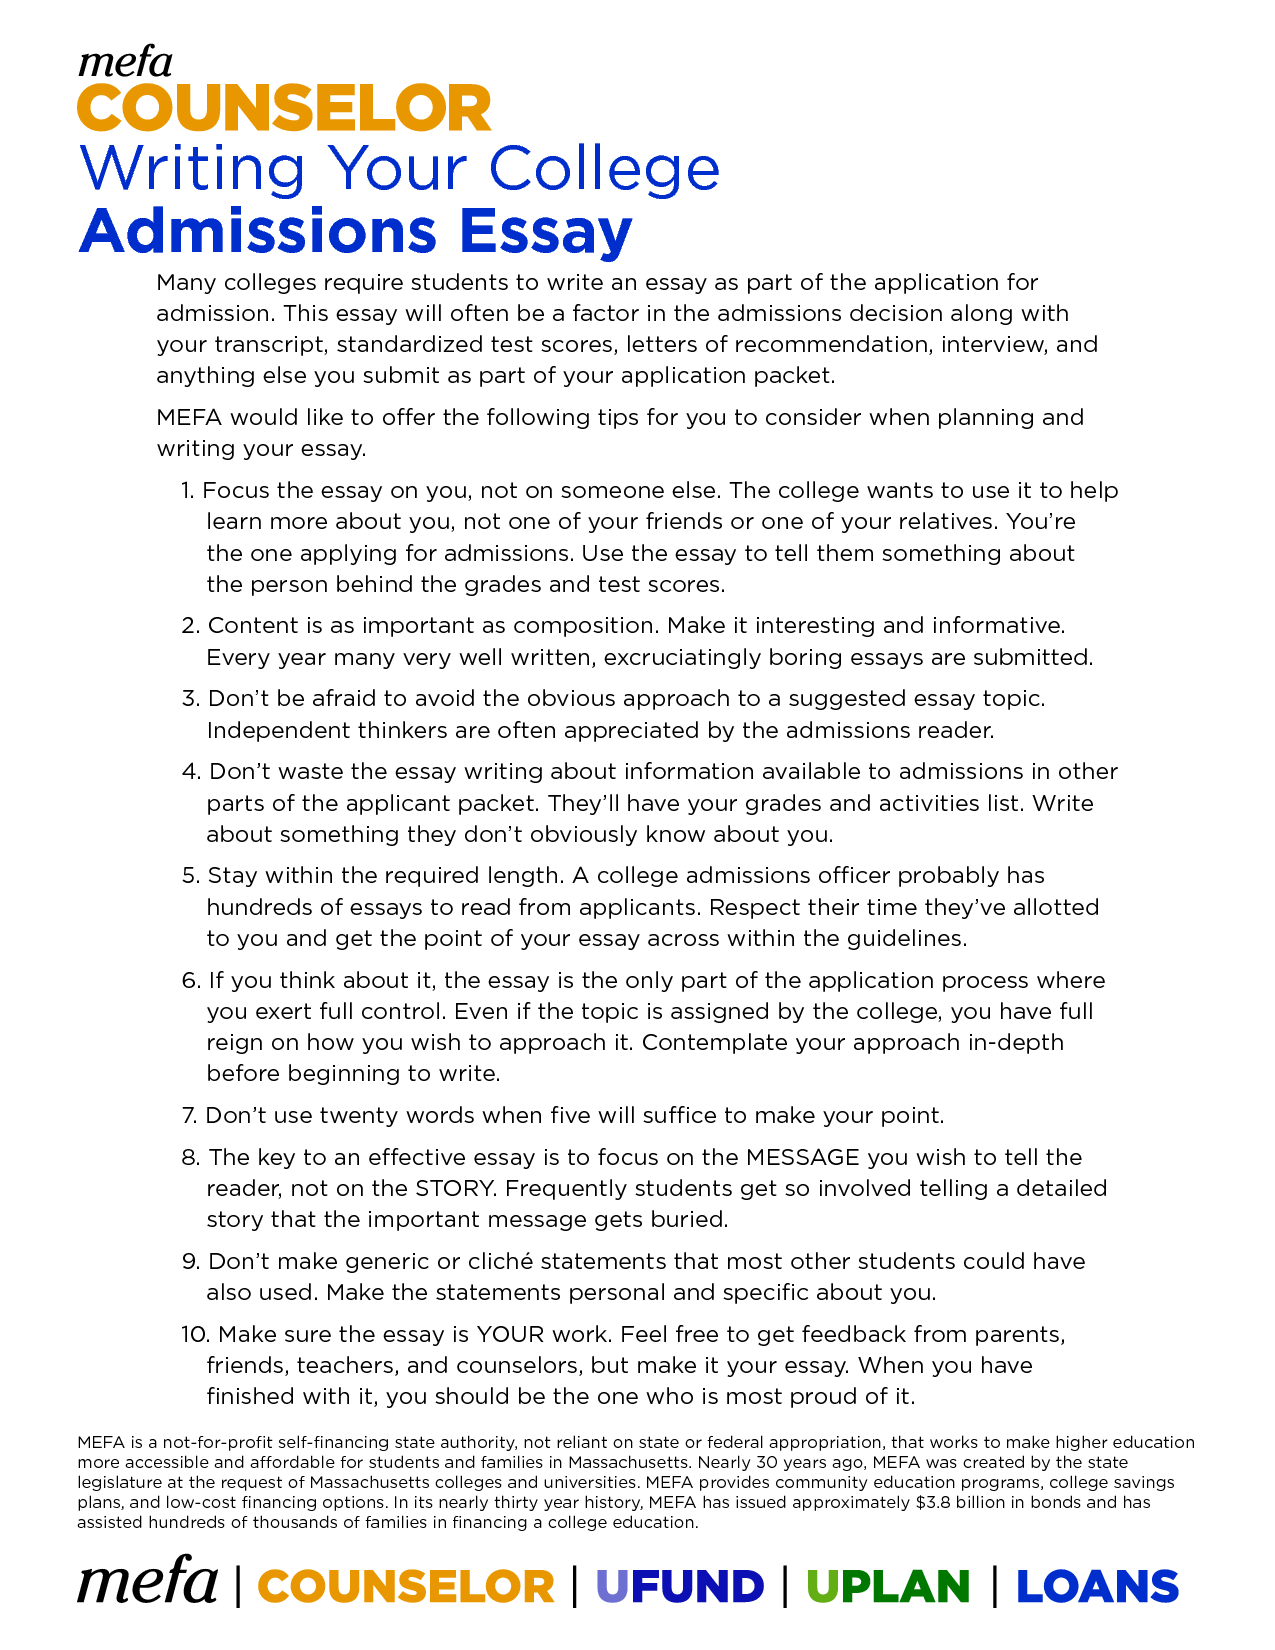 University of Washington Bothell Requirements for Admission